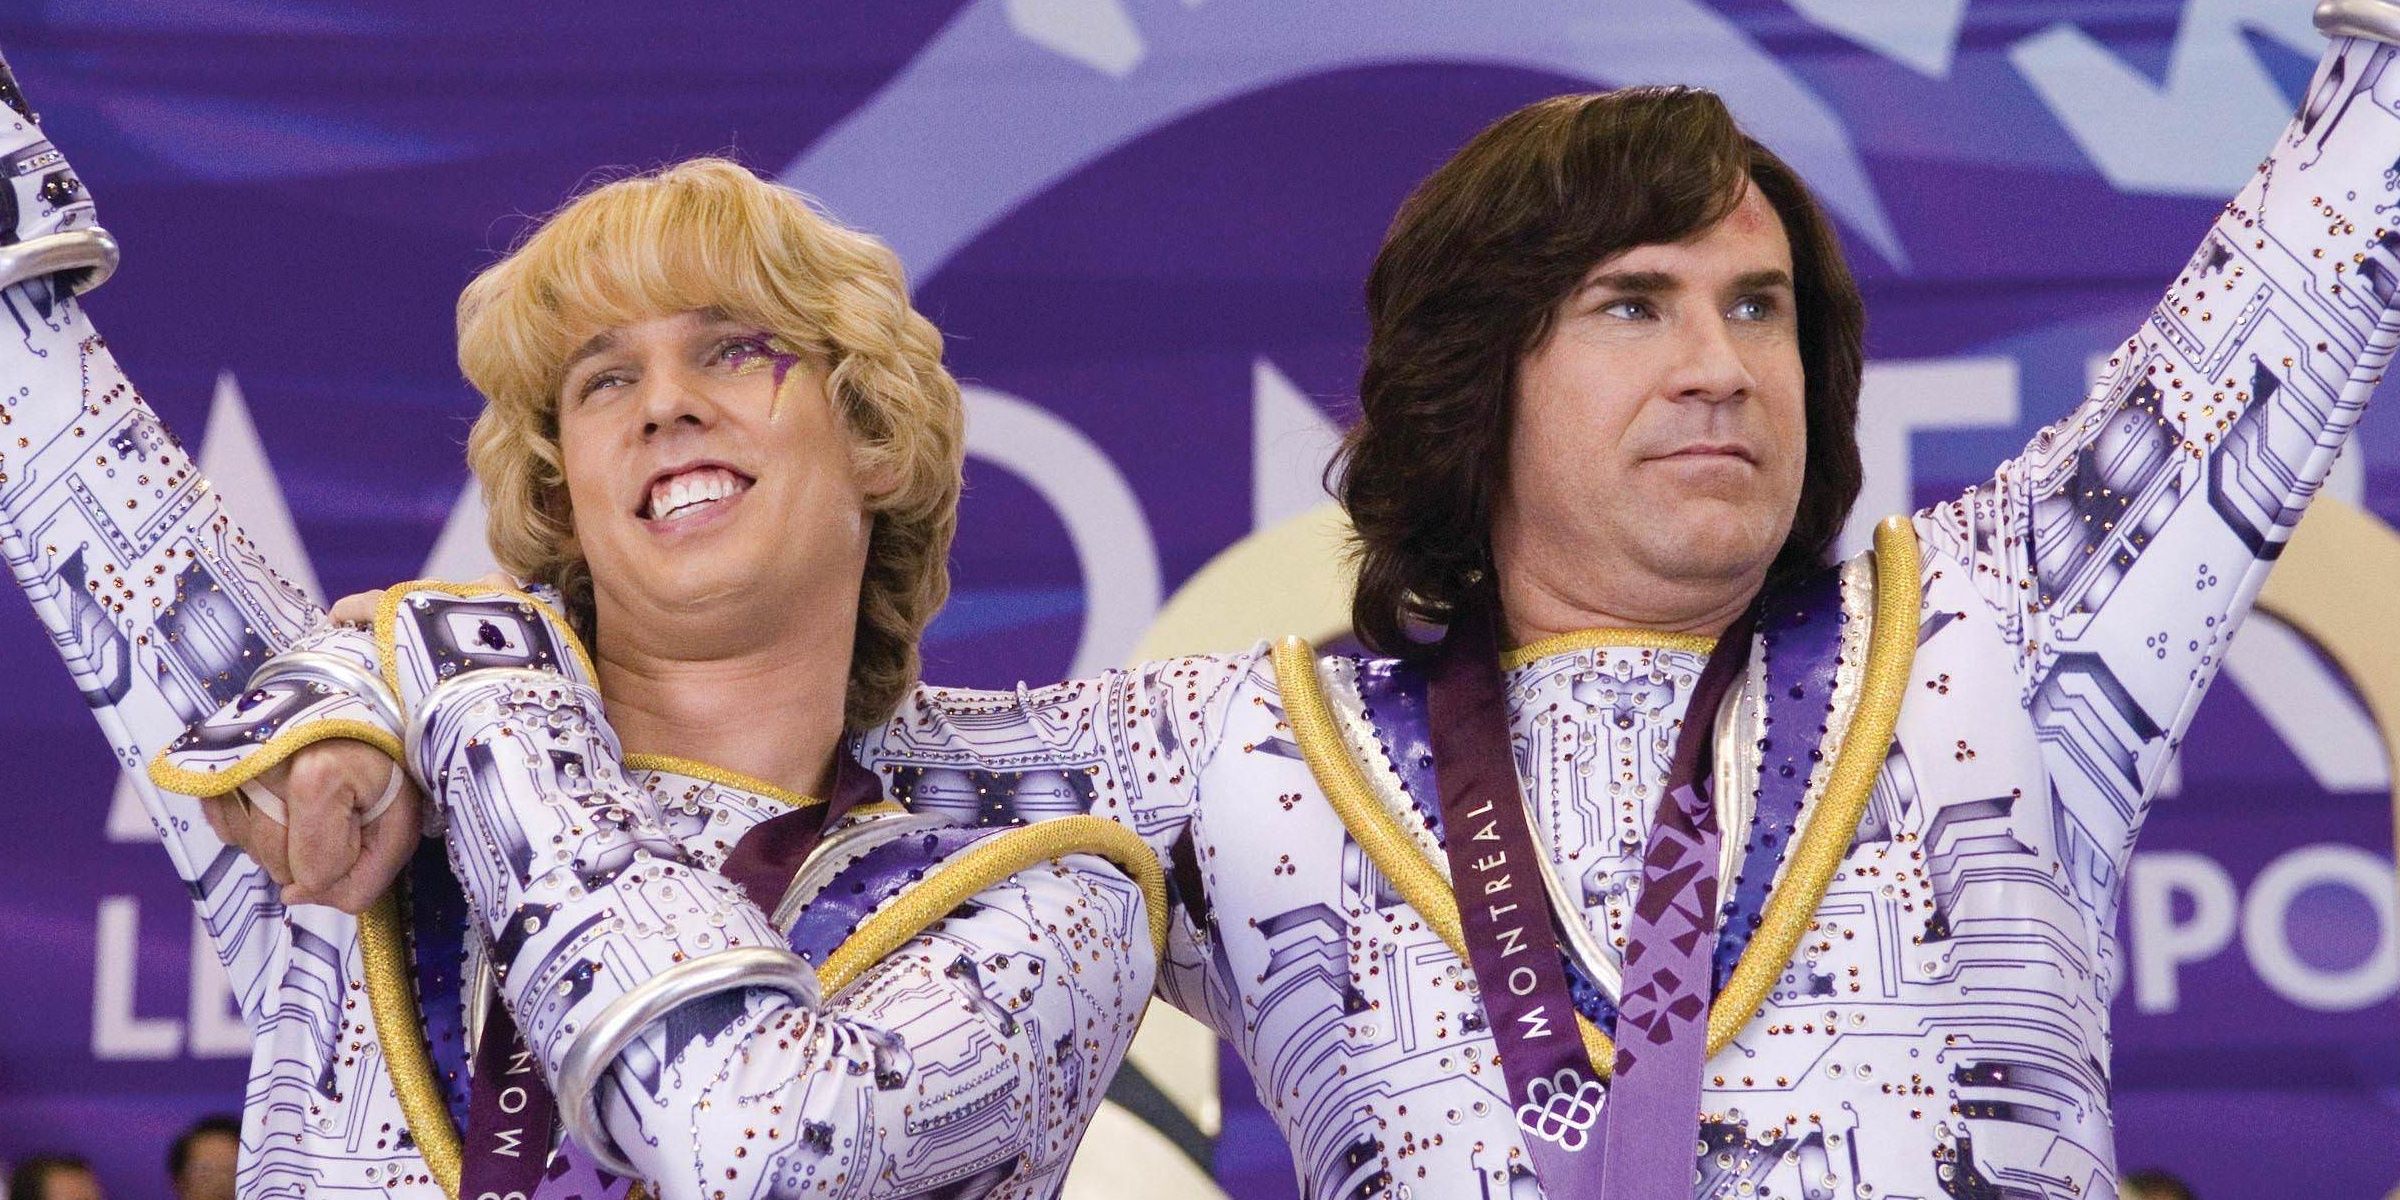 Will Ferrell and Jon Heder celebrate their victory in Blades of Glory